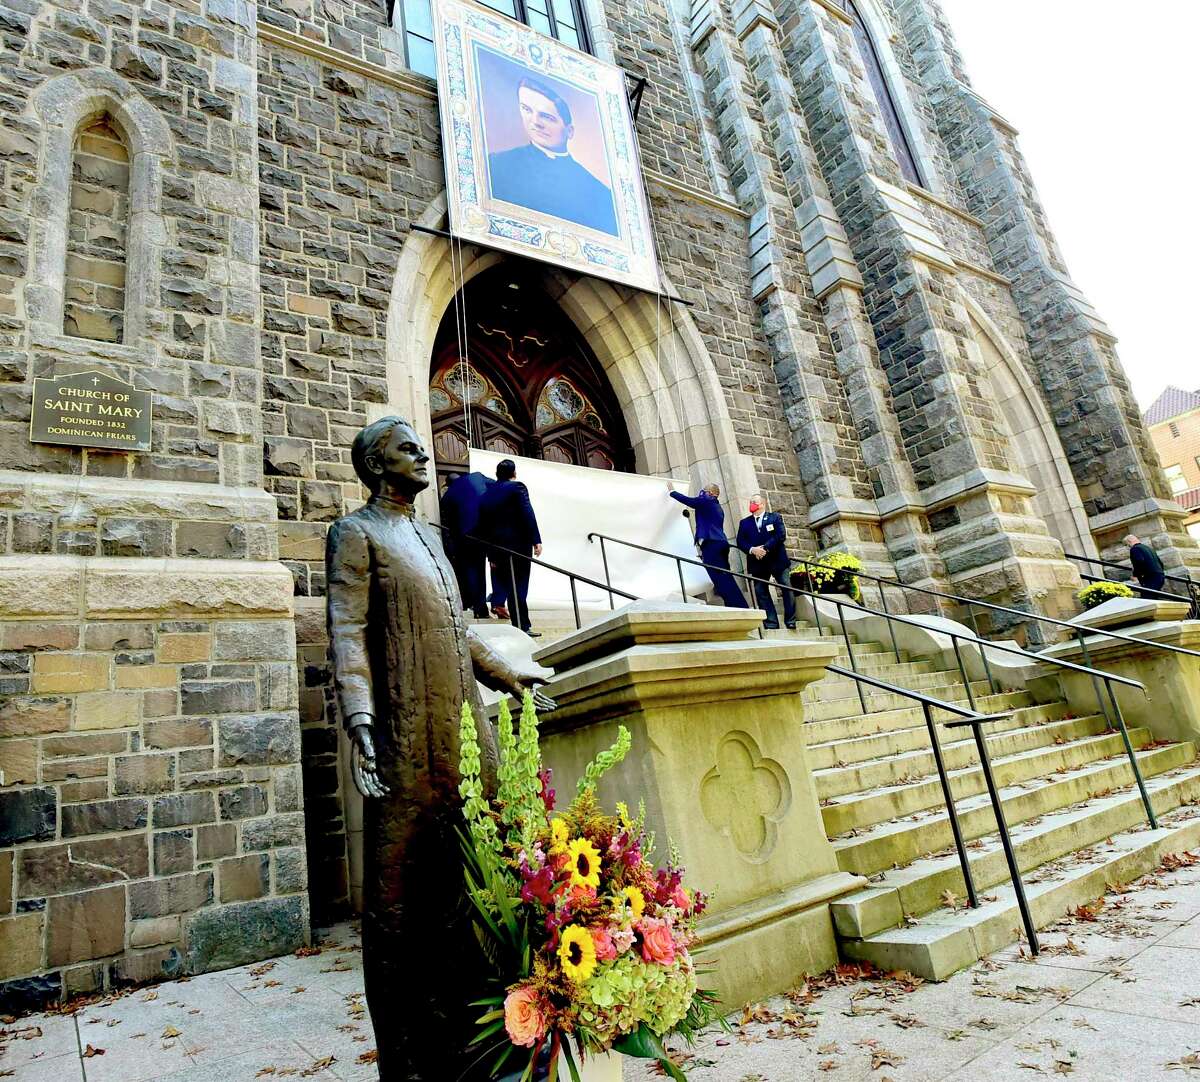 New Haven, Connecticut - Friday, October 30, 2020: A portrait of Rev. Michael J. McGivney is unveiled Saturday in front of St. Mary's Church in New Haven during a Beatification Mass for McGivney, founder of the Knights of Columbus. The mass is video streamed from the Cathedral of St. Joseph in Hartford around the world and also televised at St. Mary's Church in New Haven as the Catholic Church Saturday declared Father McGivney, "blessed", which, in the Catholic Church, is one step from canonization as a saint. McGivney died in 1890. McGivney’s tomb is in the rear of St. Mary, which is undergoing renovation and is closed because of the coronavirus pandemic. Pope Francis announced Wednesday that he recognized a 2015 miracle attributed to McGivney’s intercession, beatifying him. A second miracle is required to elevate McGivney to sainthood.